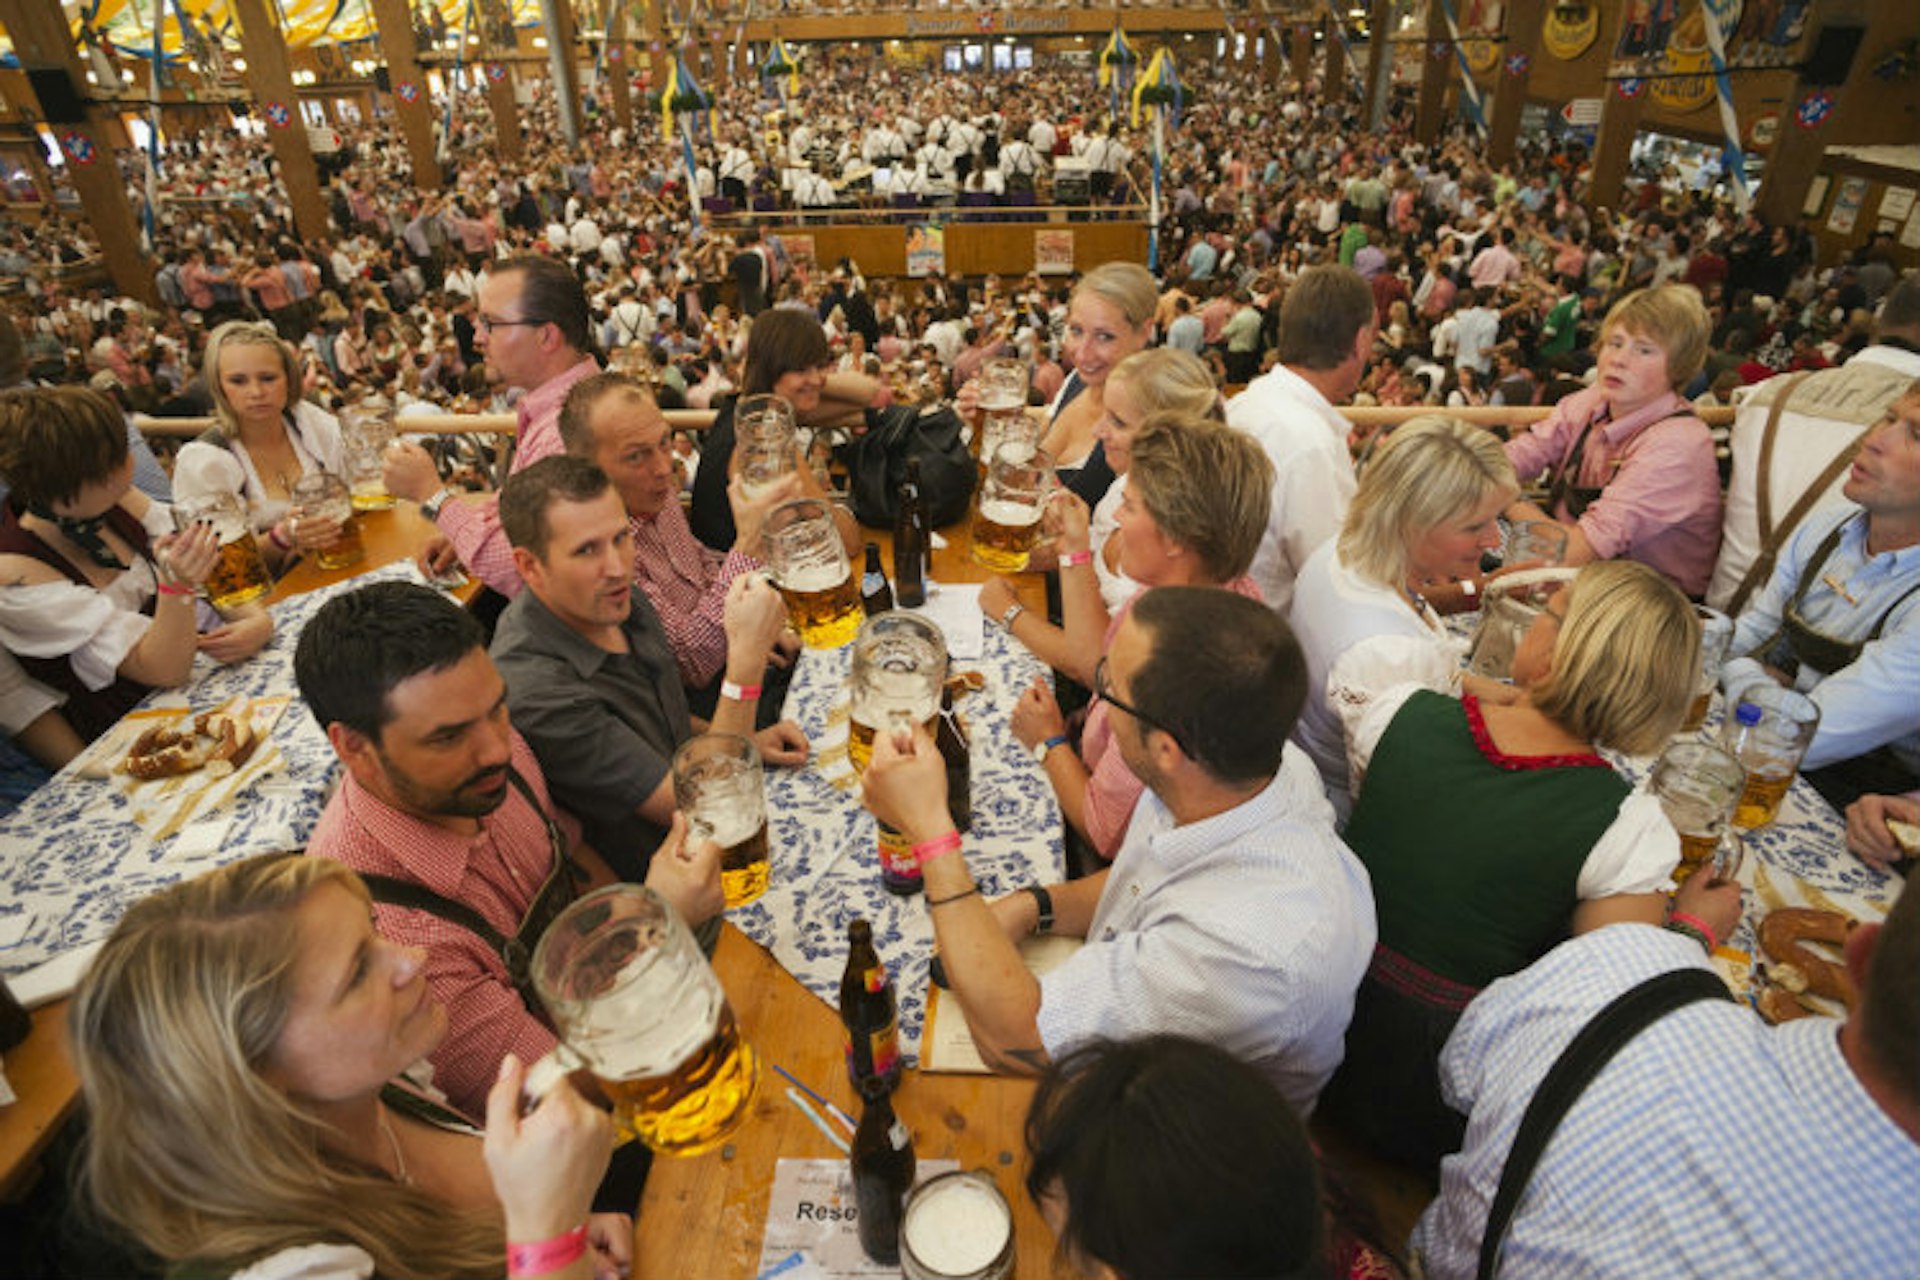 Typical beer tent scene at Oktoberfest, Munich, Germany.